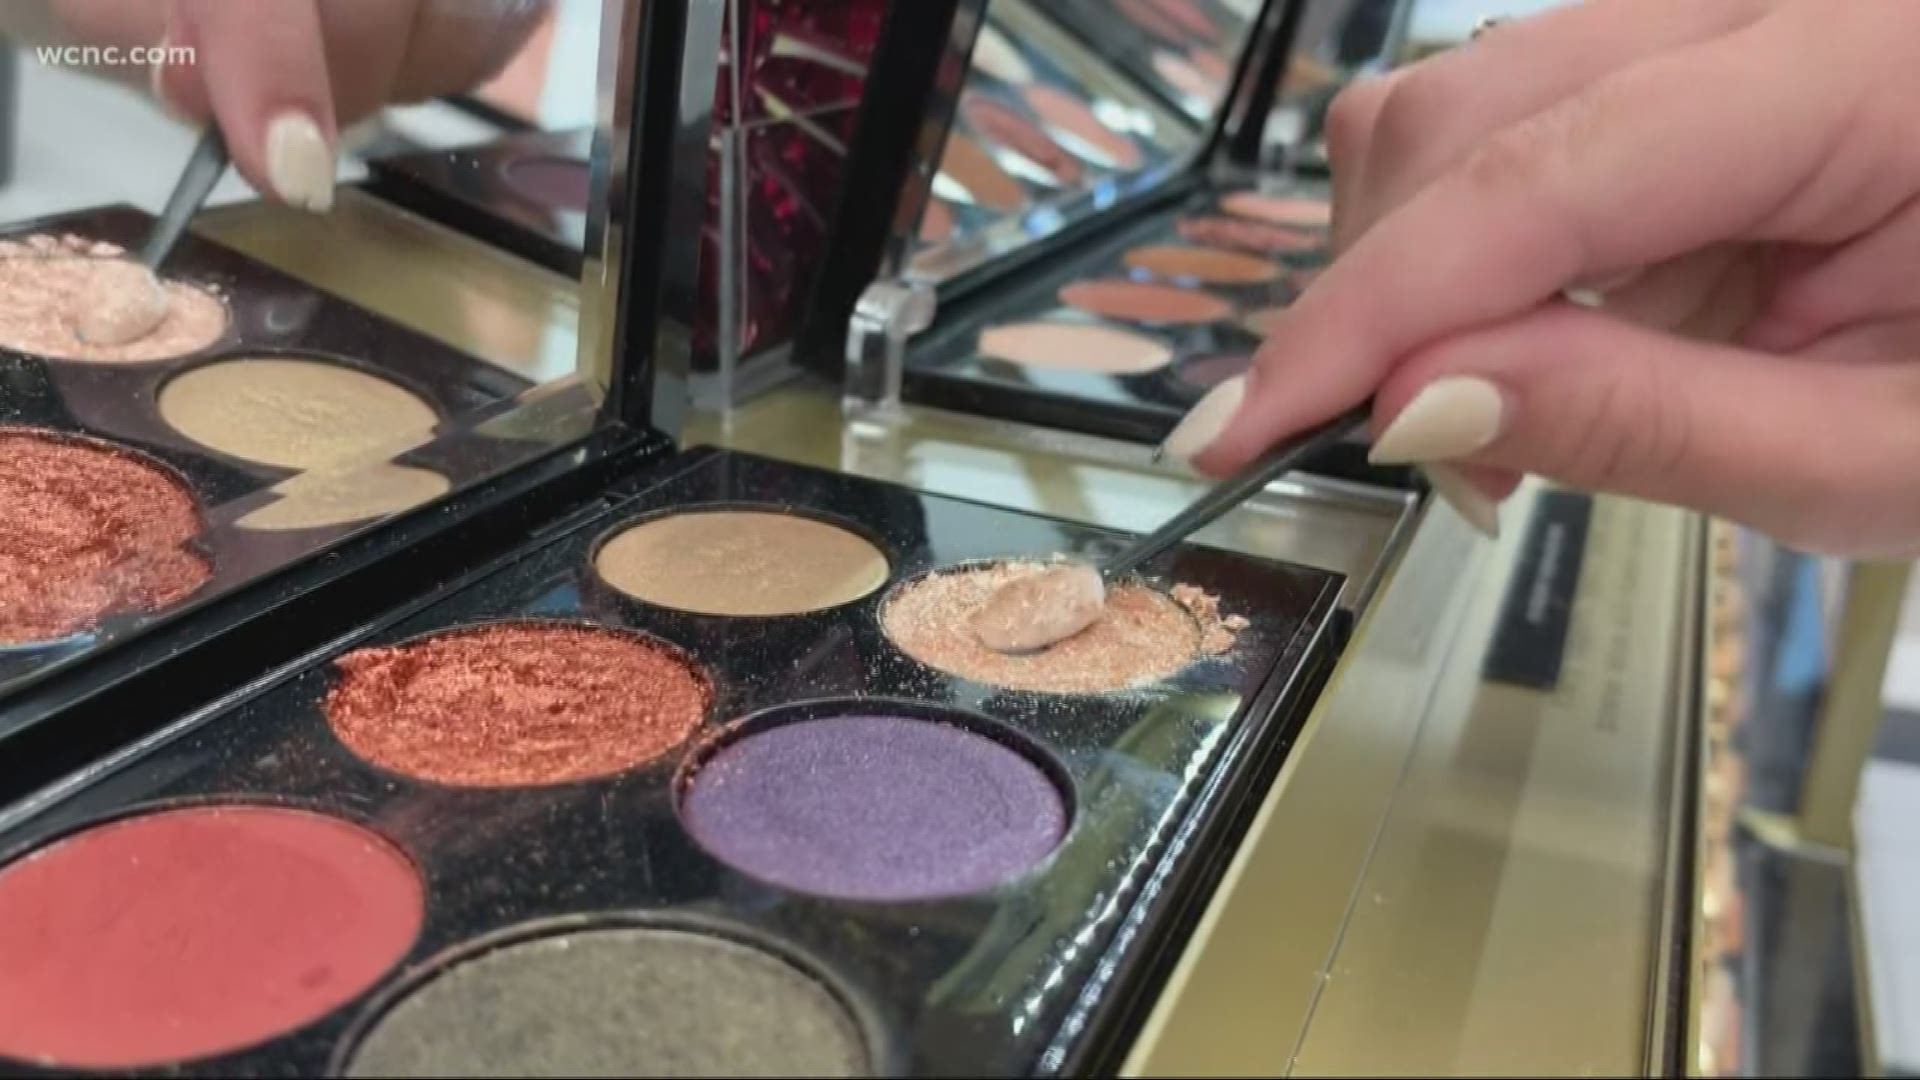 If you've ever been in a makeup store, you've probably seen the testers of different products. But it turns out, those can make you seriously sick.